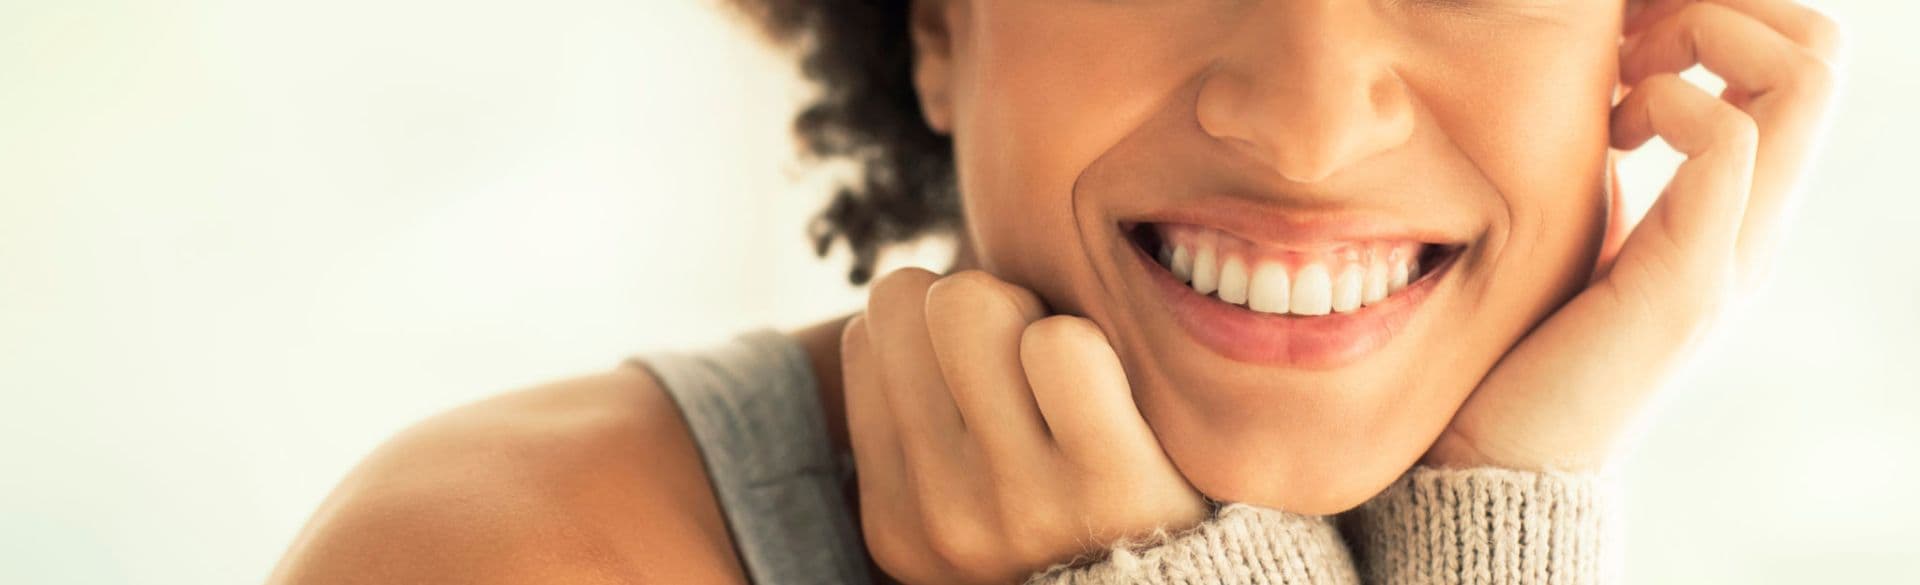 Get a New Smile - All About Teeth Implants